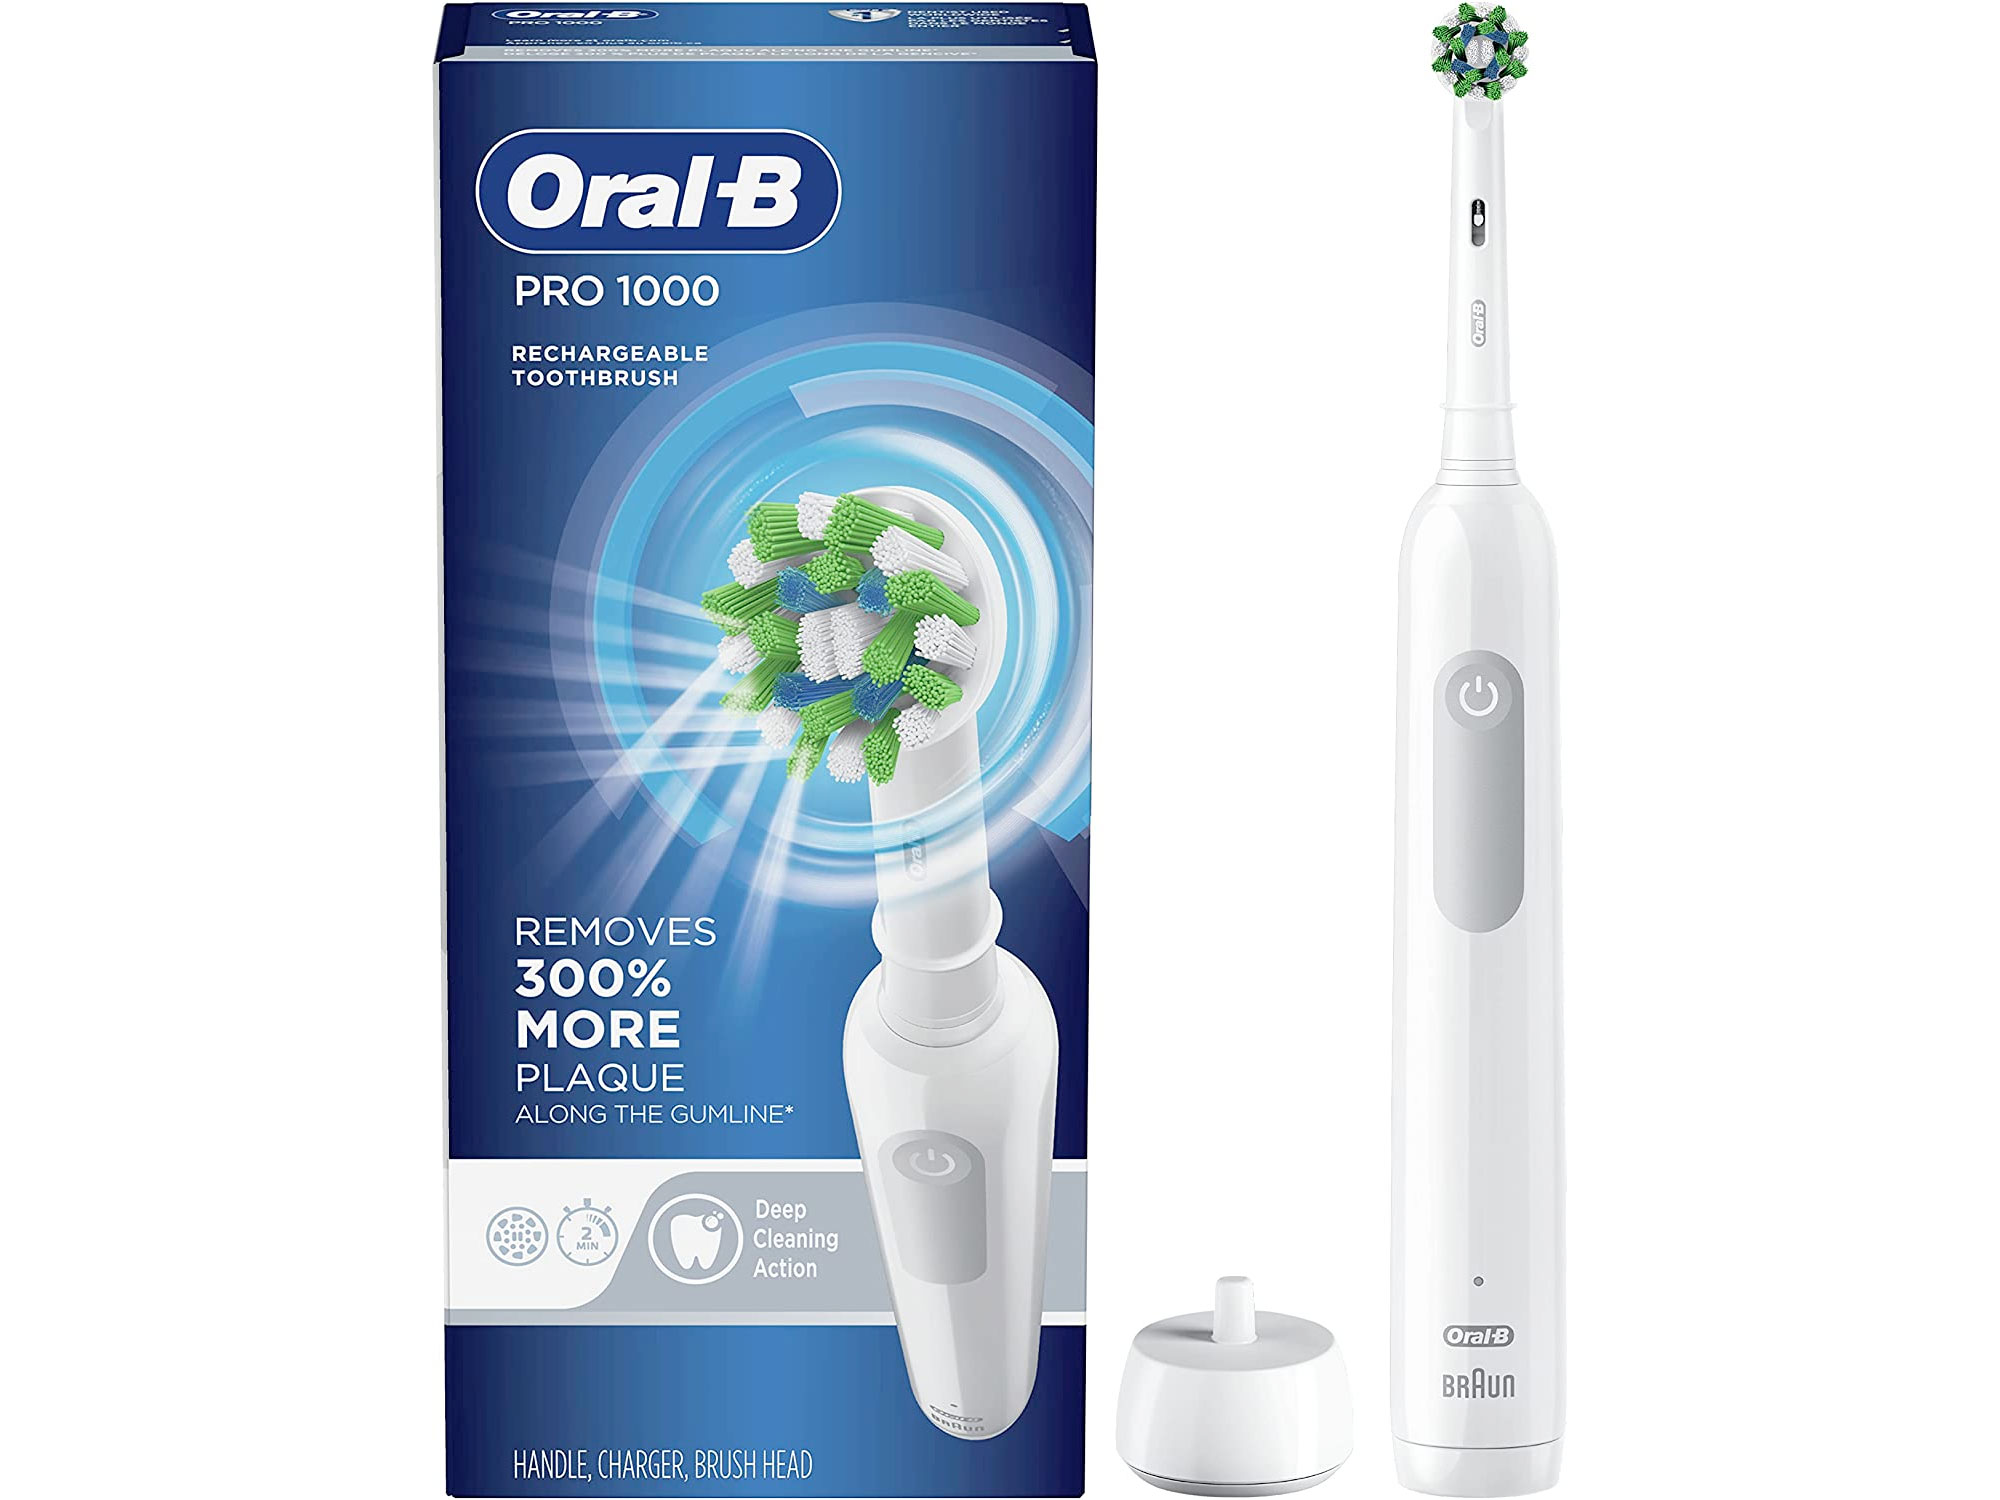 Amazon：Oral-B Pro 1000 Electric Toothbrush with Brush Head只卖$44.31